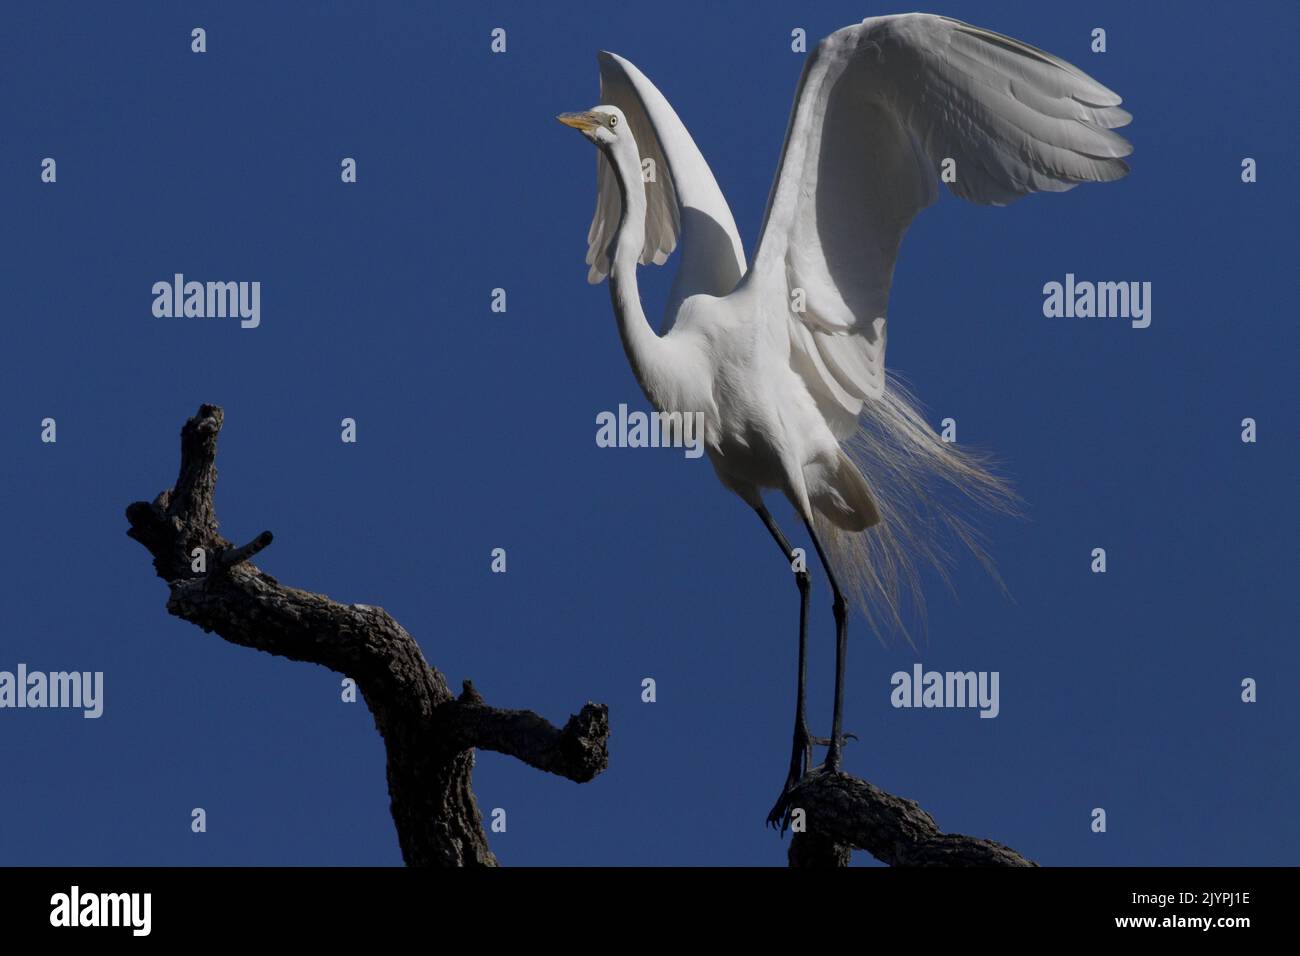 Great Egret in breeding plumage stretches beautifully and lifts wings while perched on bare tree branch against clear, blue sky in St. Augustine, Flor Stock Photo